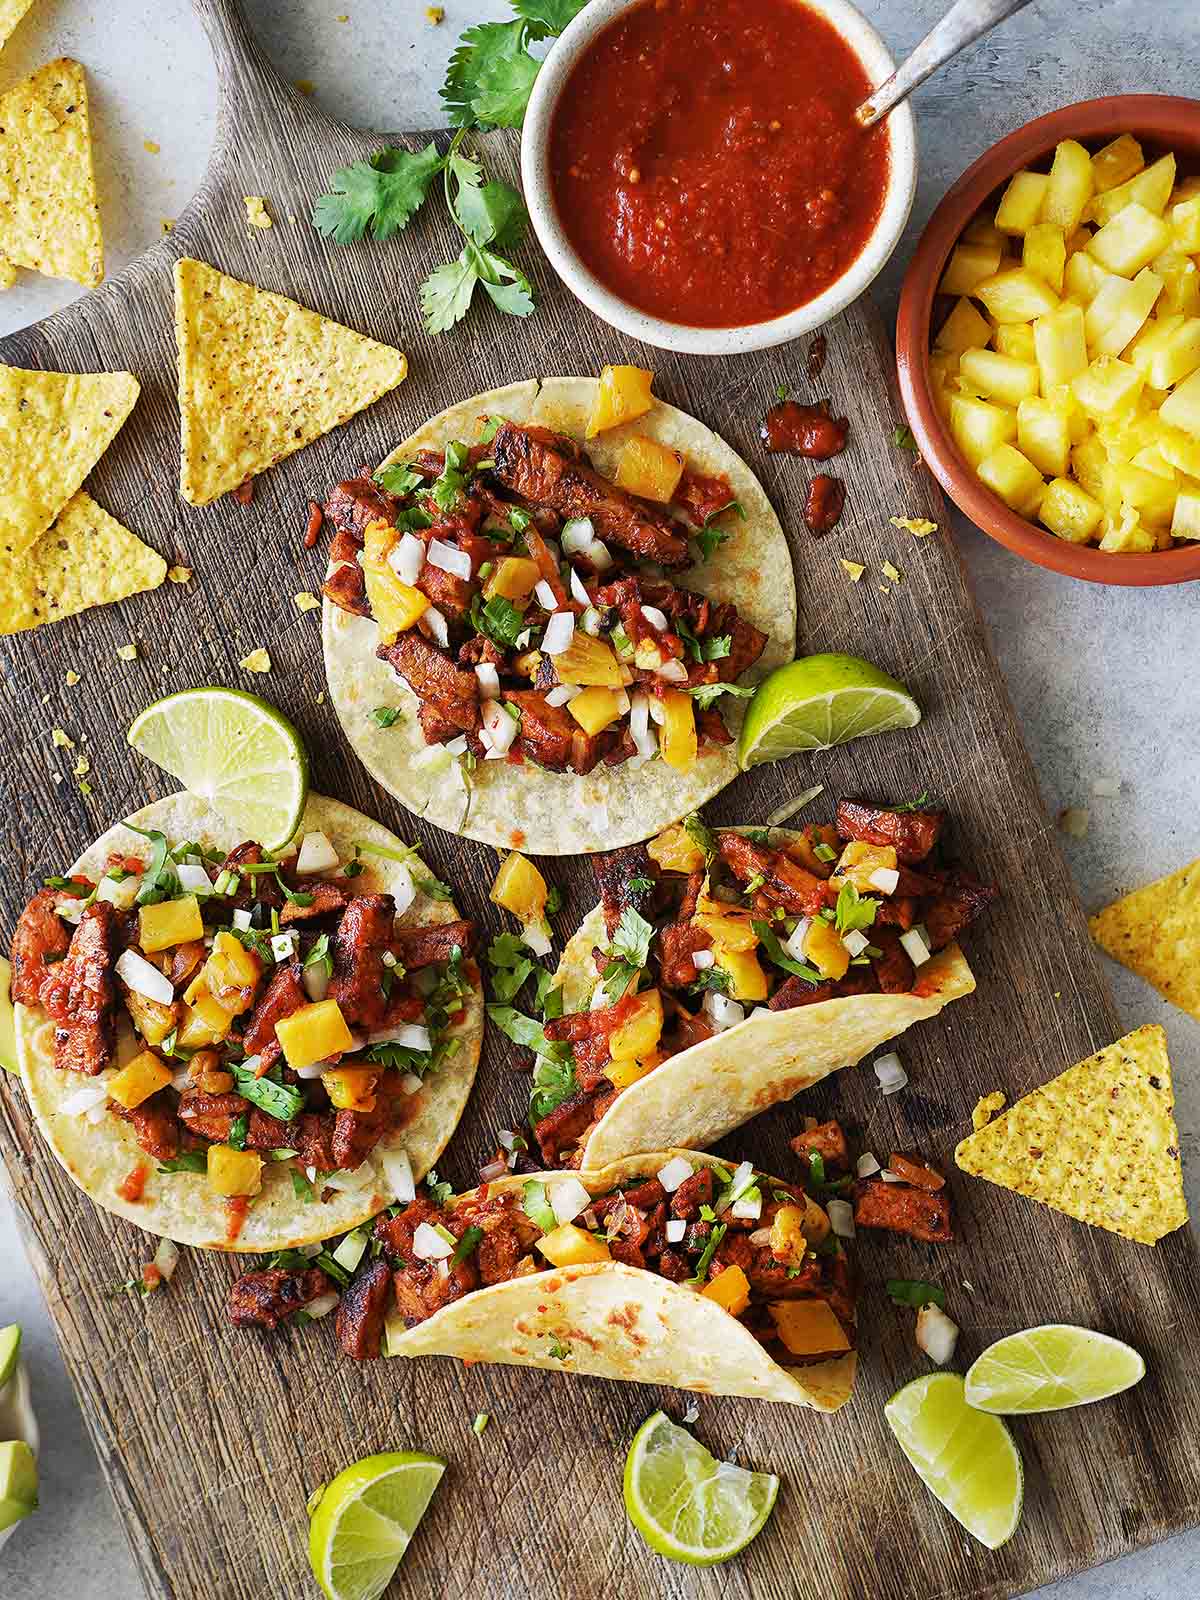 Four tacos al pastor on a wood board with salsa and pineapples on the side.